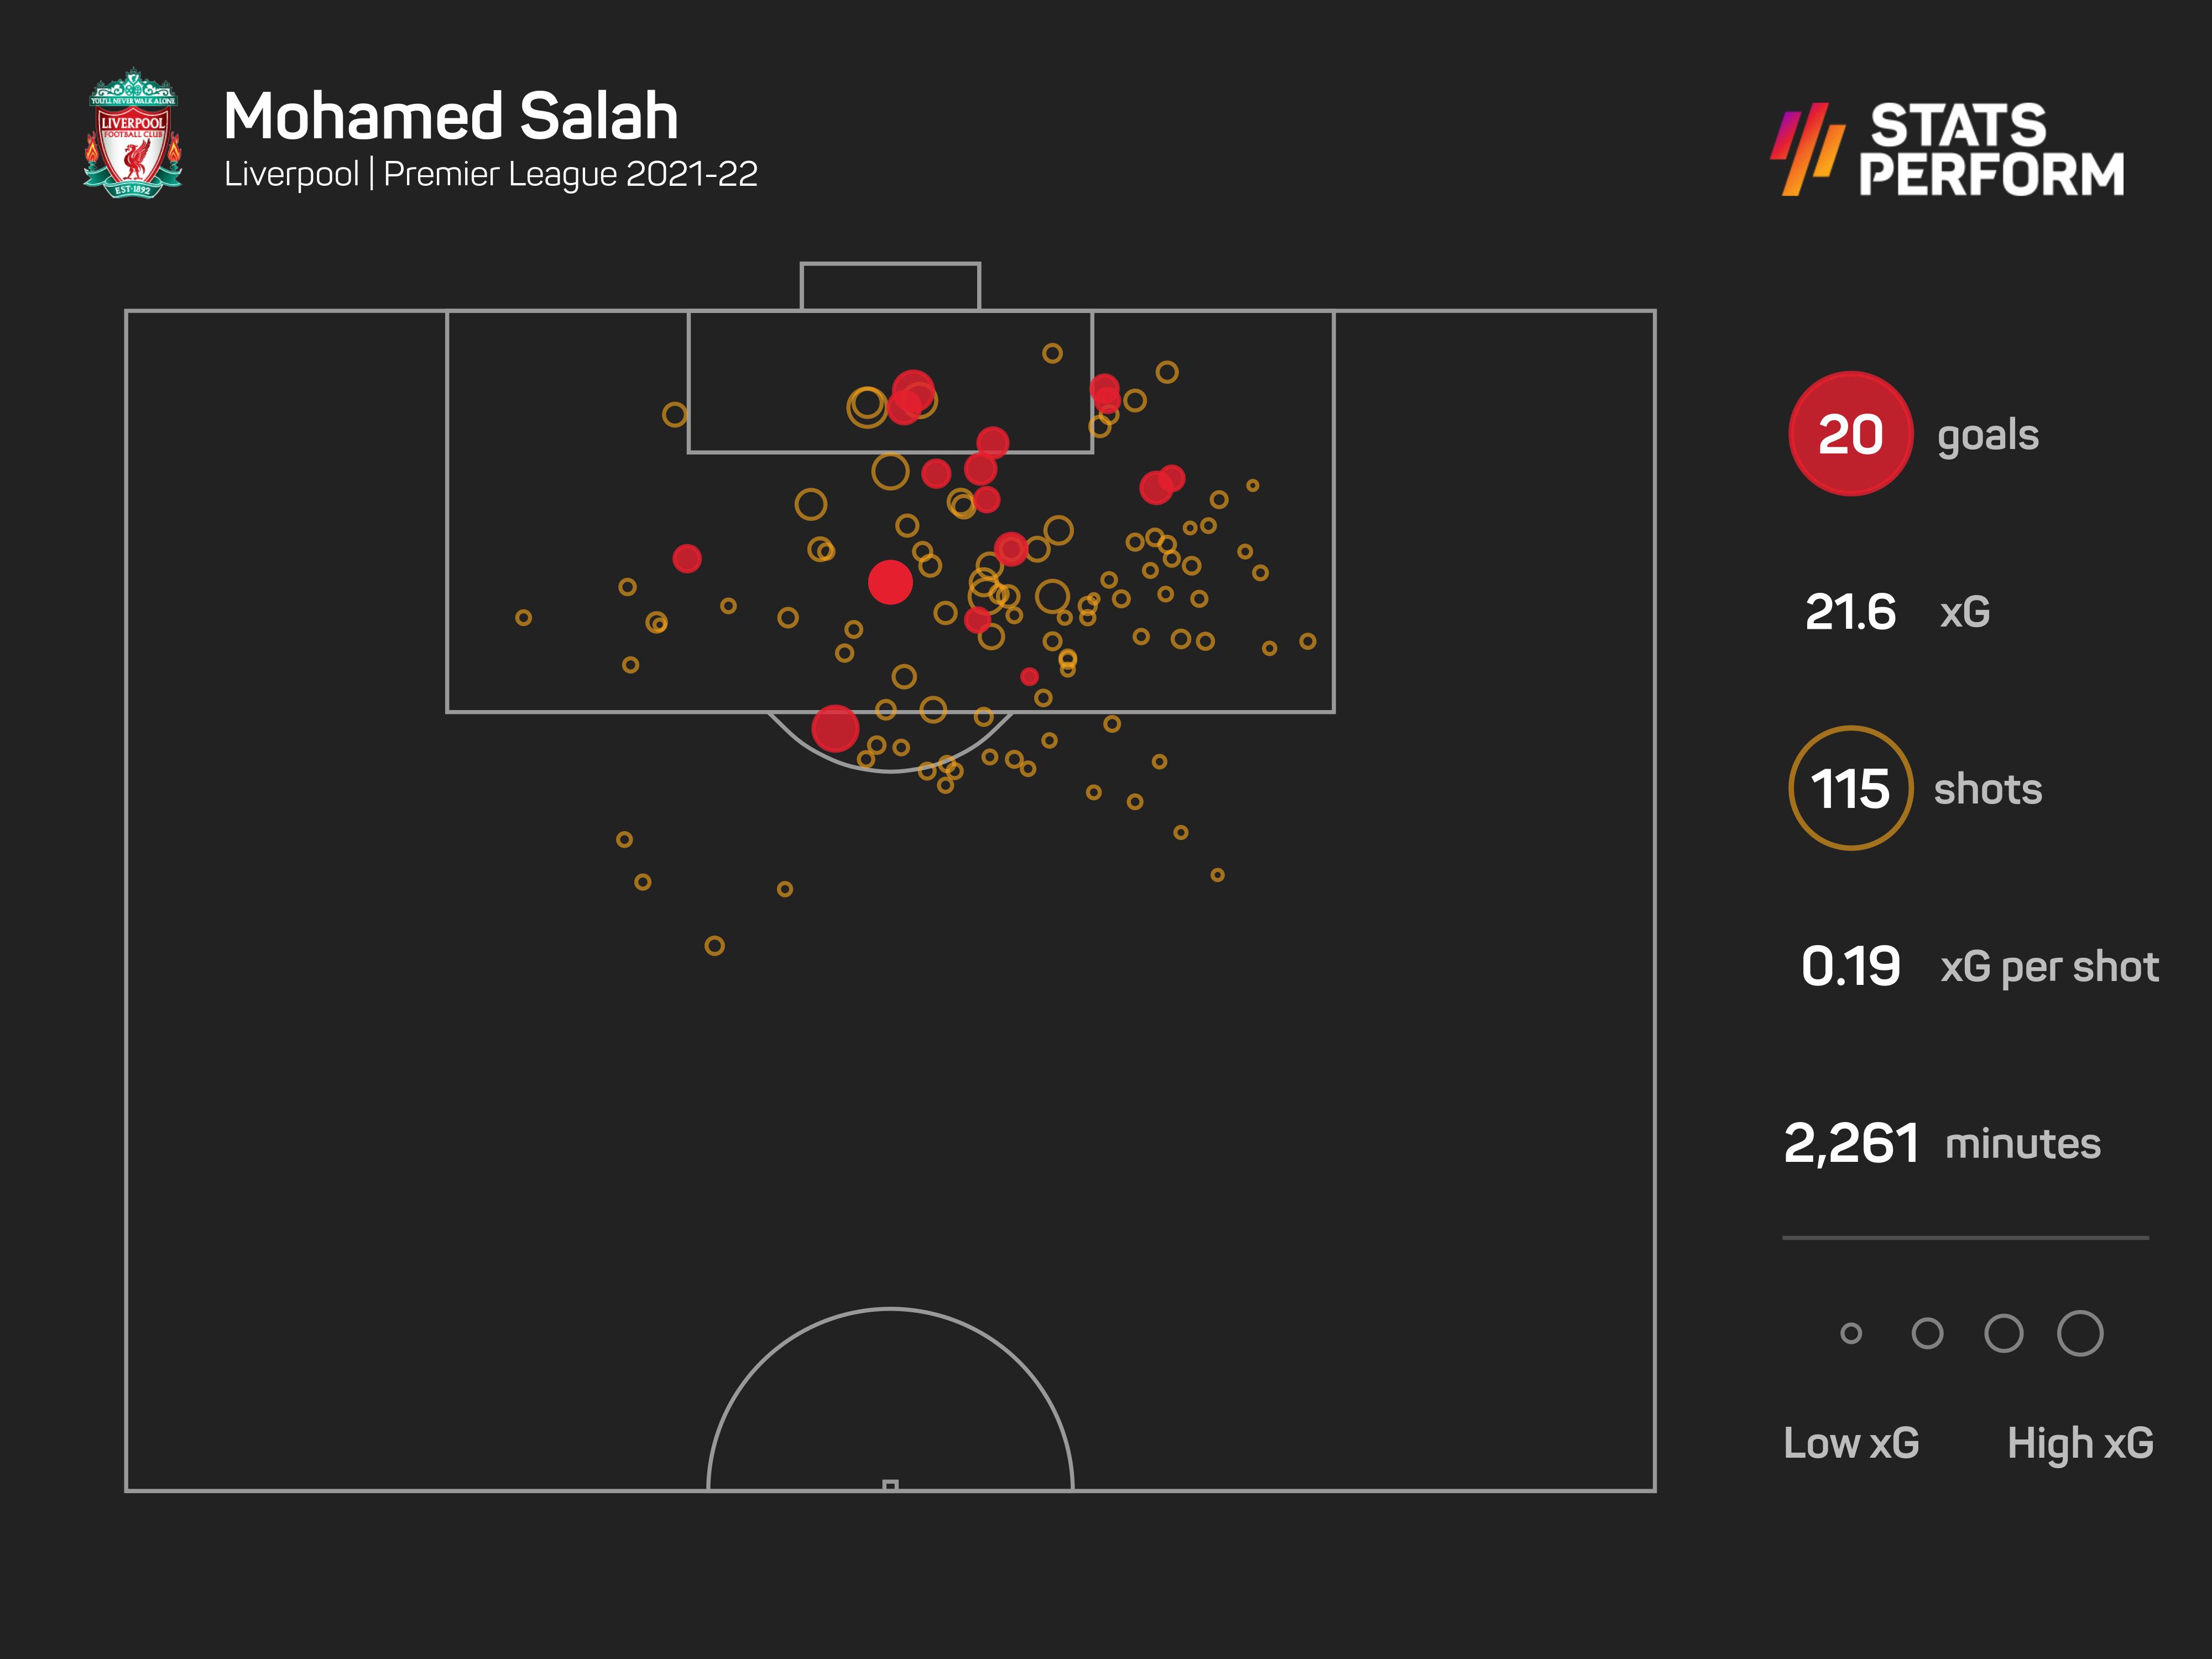 Mohamed Salah is the Premier League's leading scorer this season, but will not be going to Qatar